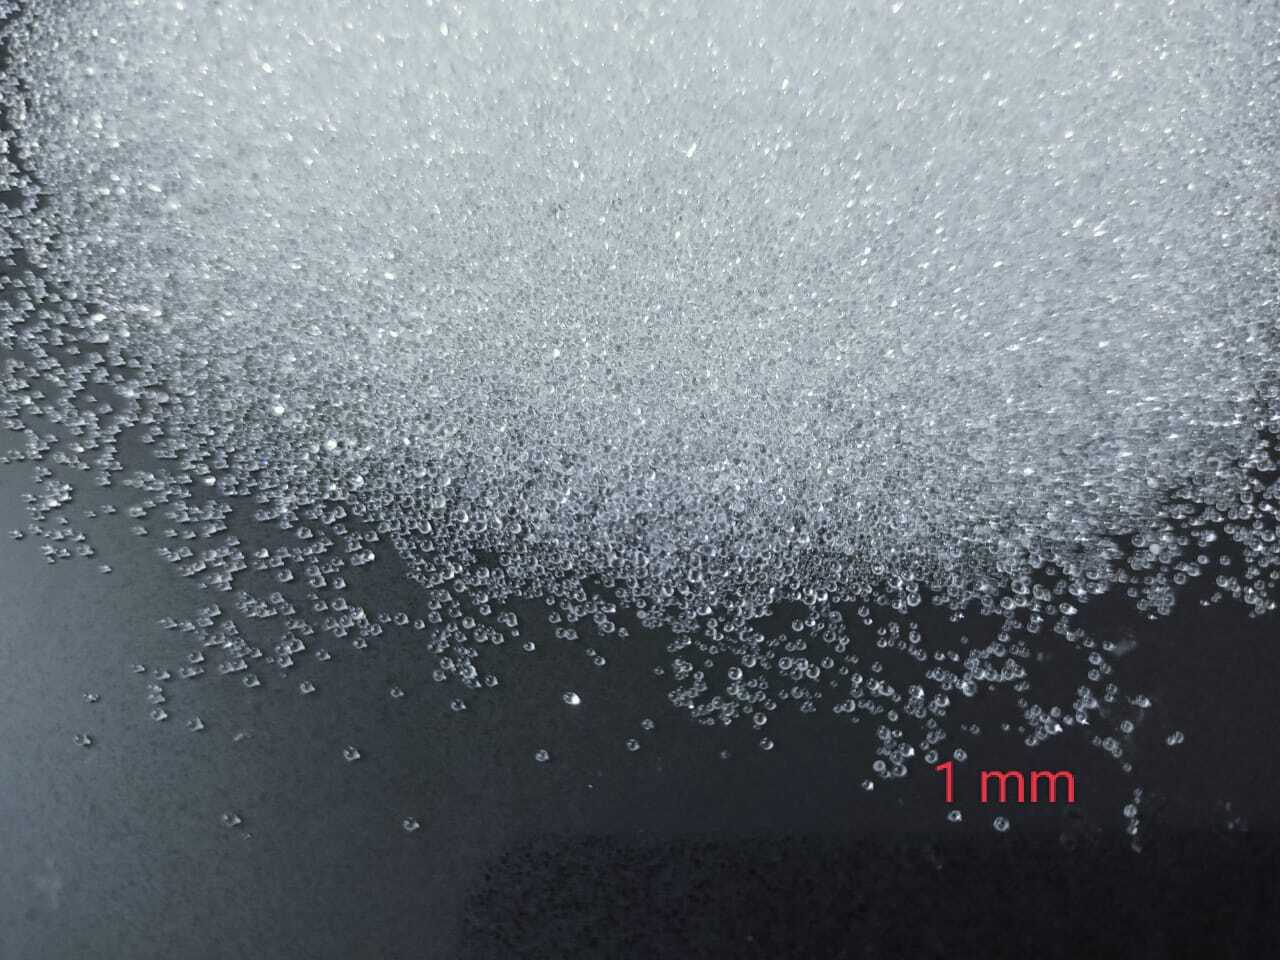 granular grain road safty shine road marking industial paint filler 100 reflative light glass sand and road marking glass beads